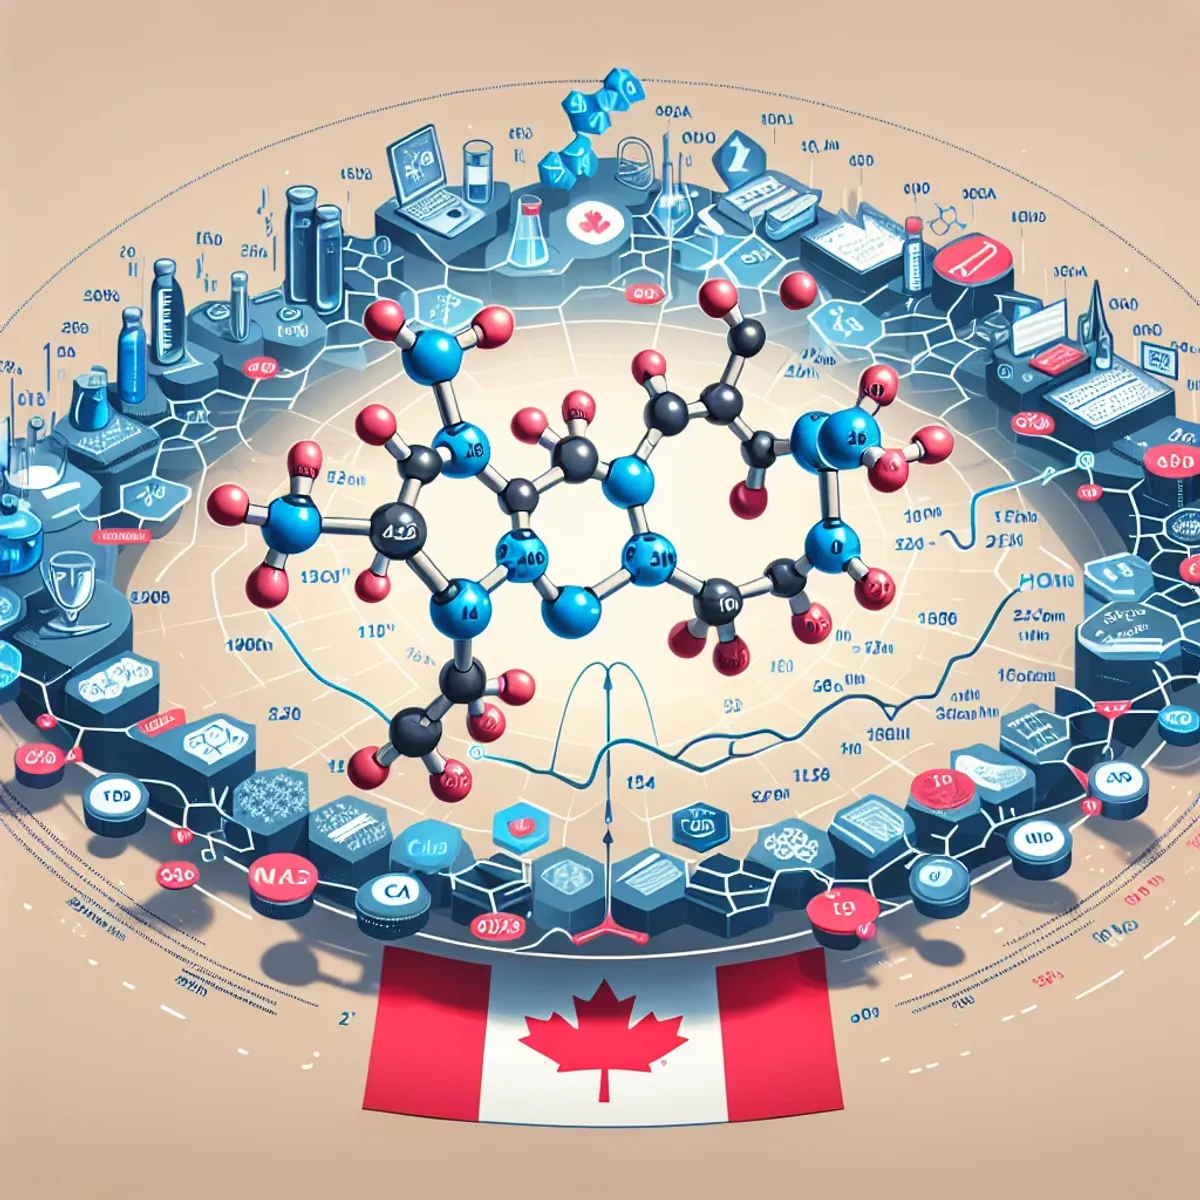 An abstract illustration of the molecular structure of Human Growth Hormone (HGH), with a 22 kDa peptide chain containing 191 amino acids. The image also incorporates scientific imagery related to the 24-hour cycle and subtle Canadian elements in the background.